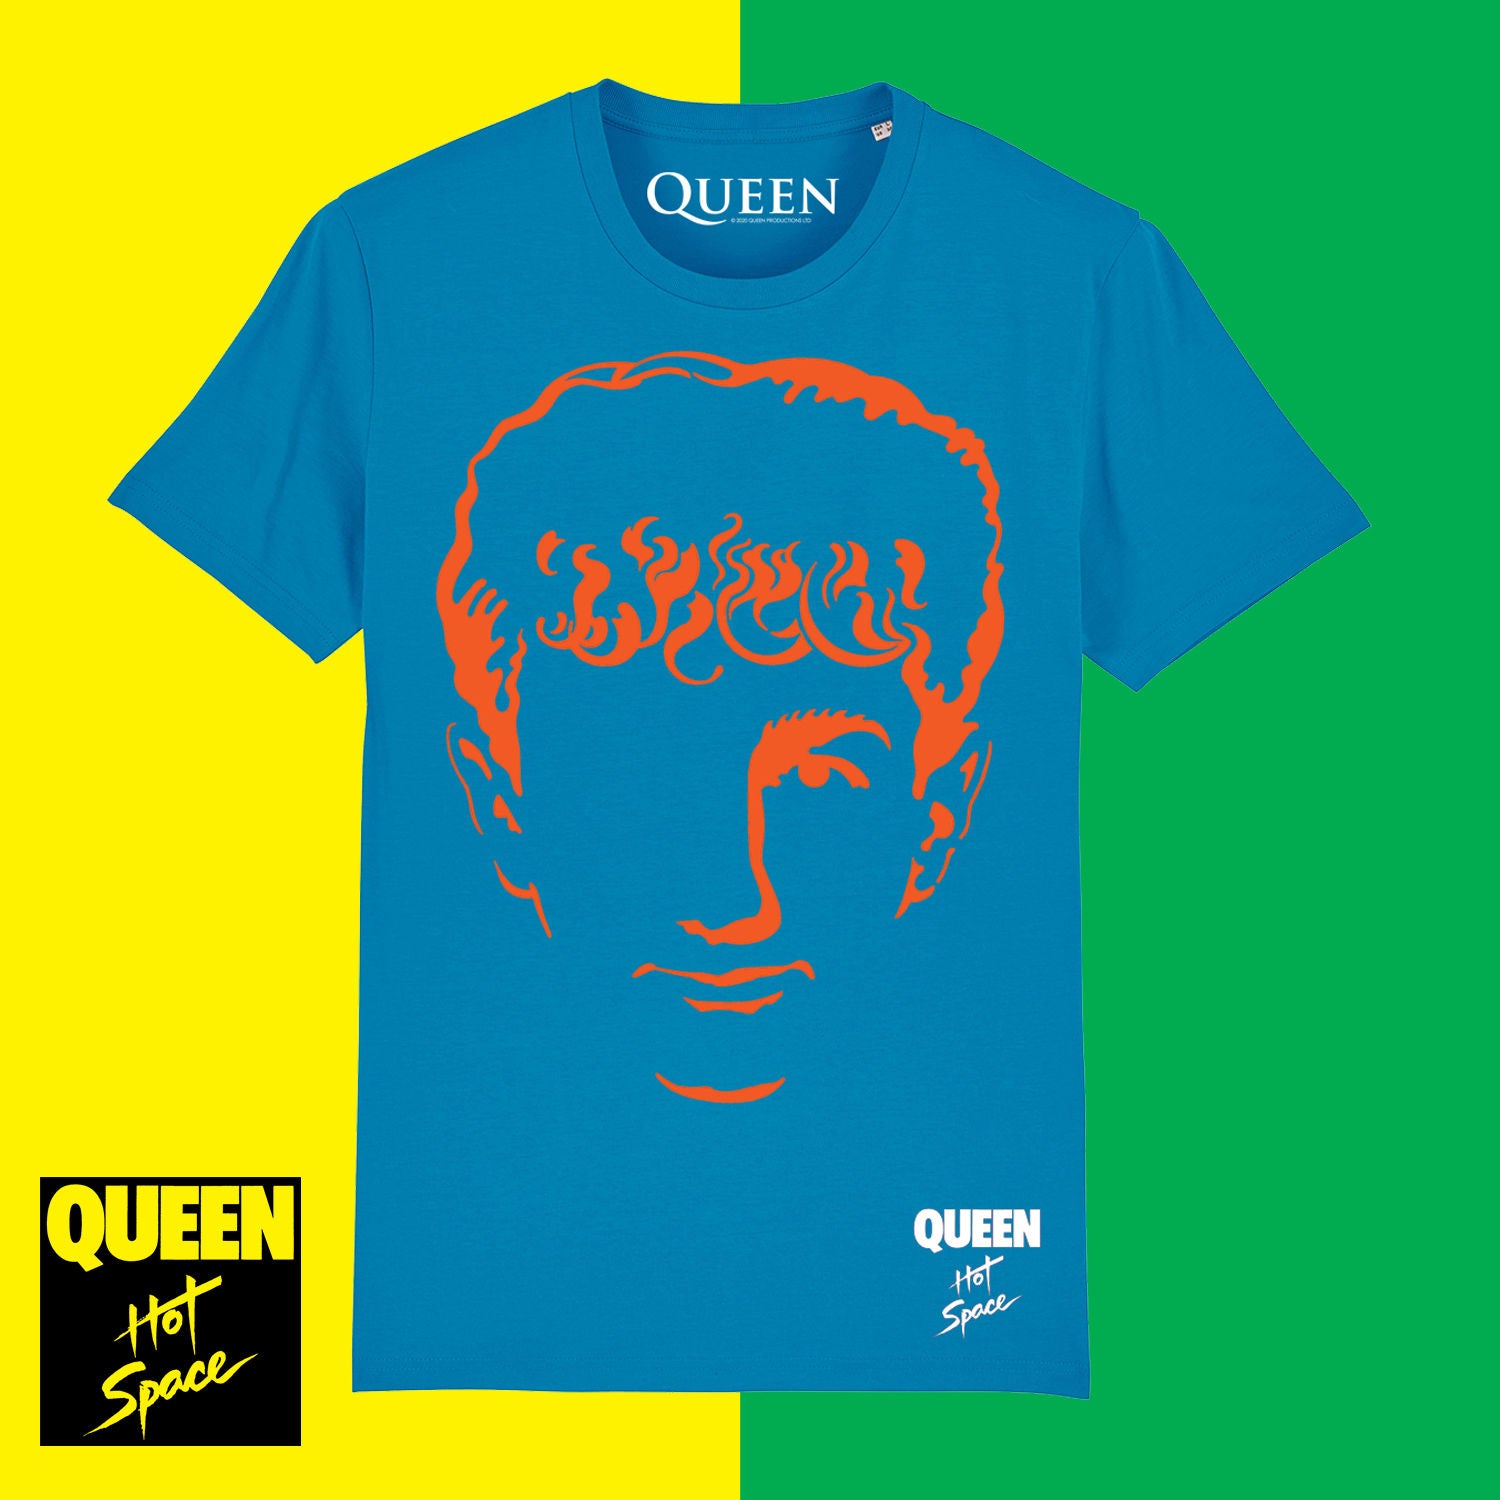 Queen - Limited Edition Hot Space John T-Shirt